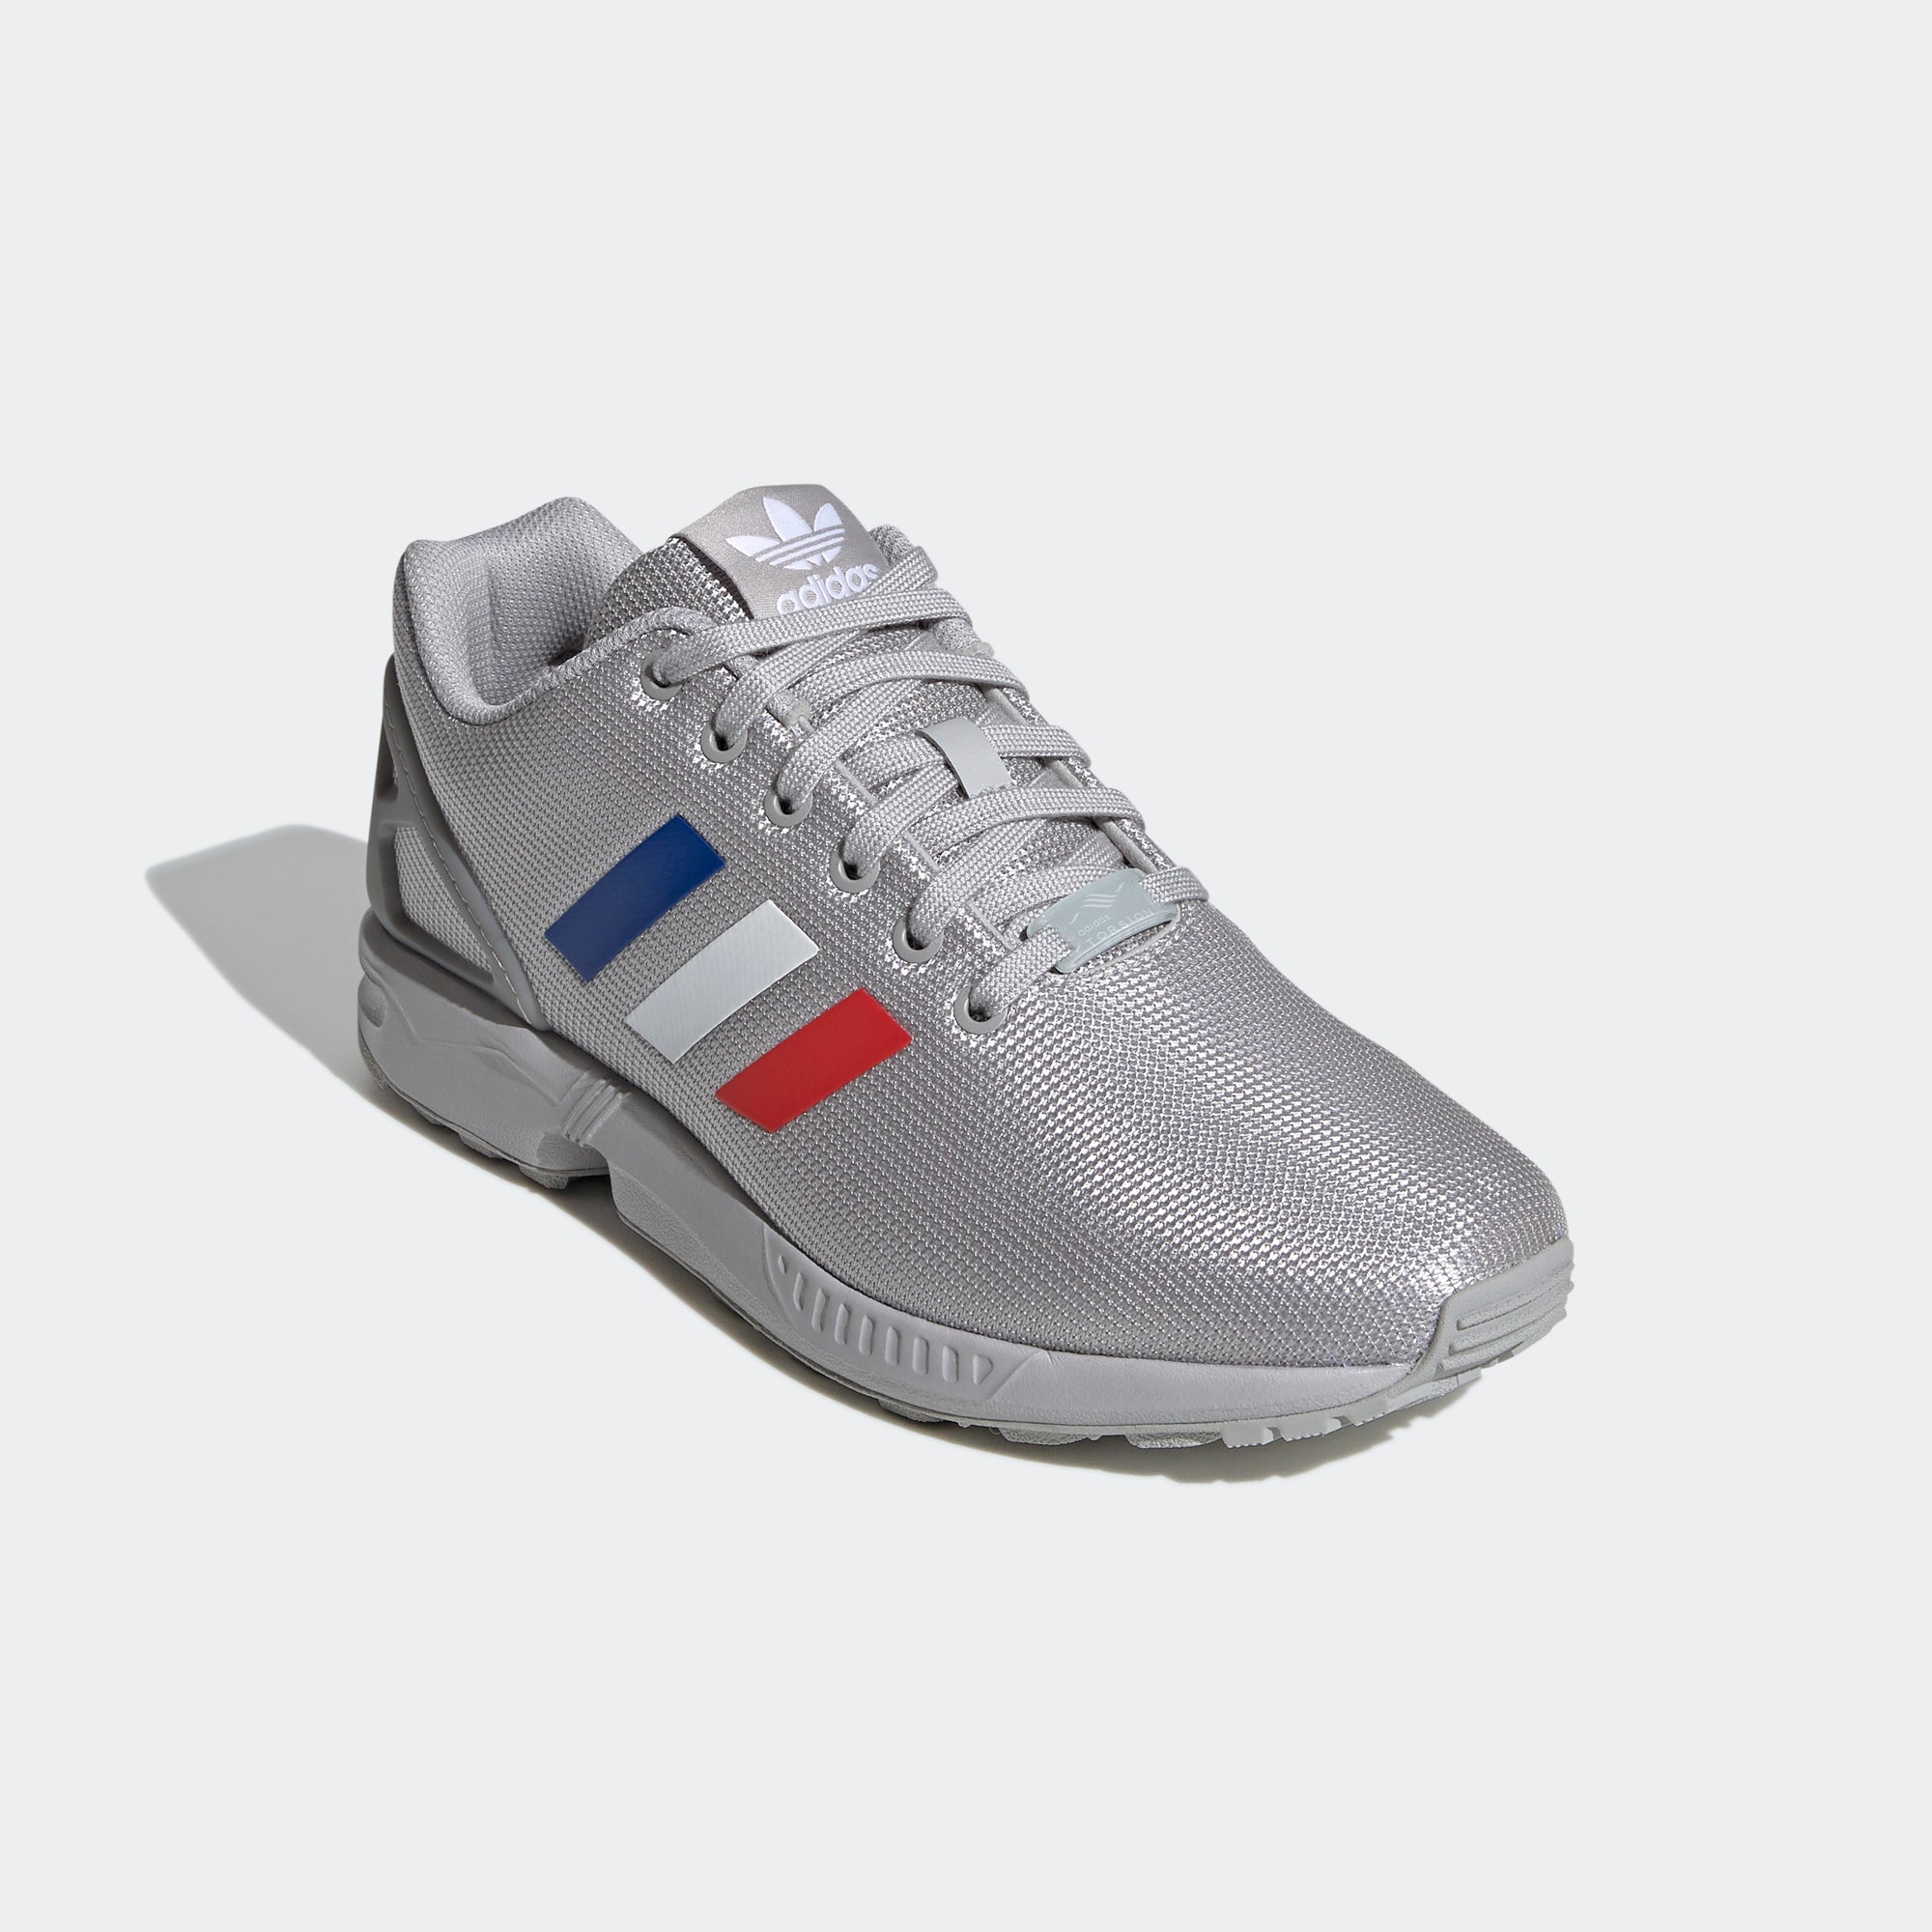 adidas ZX Flux Shoes Grey Chicago City Sports